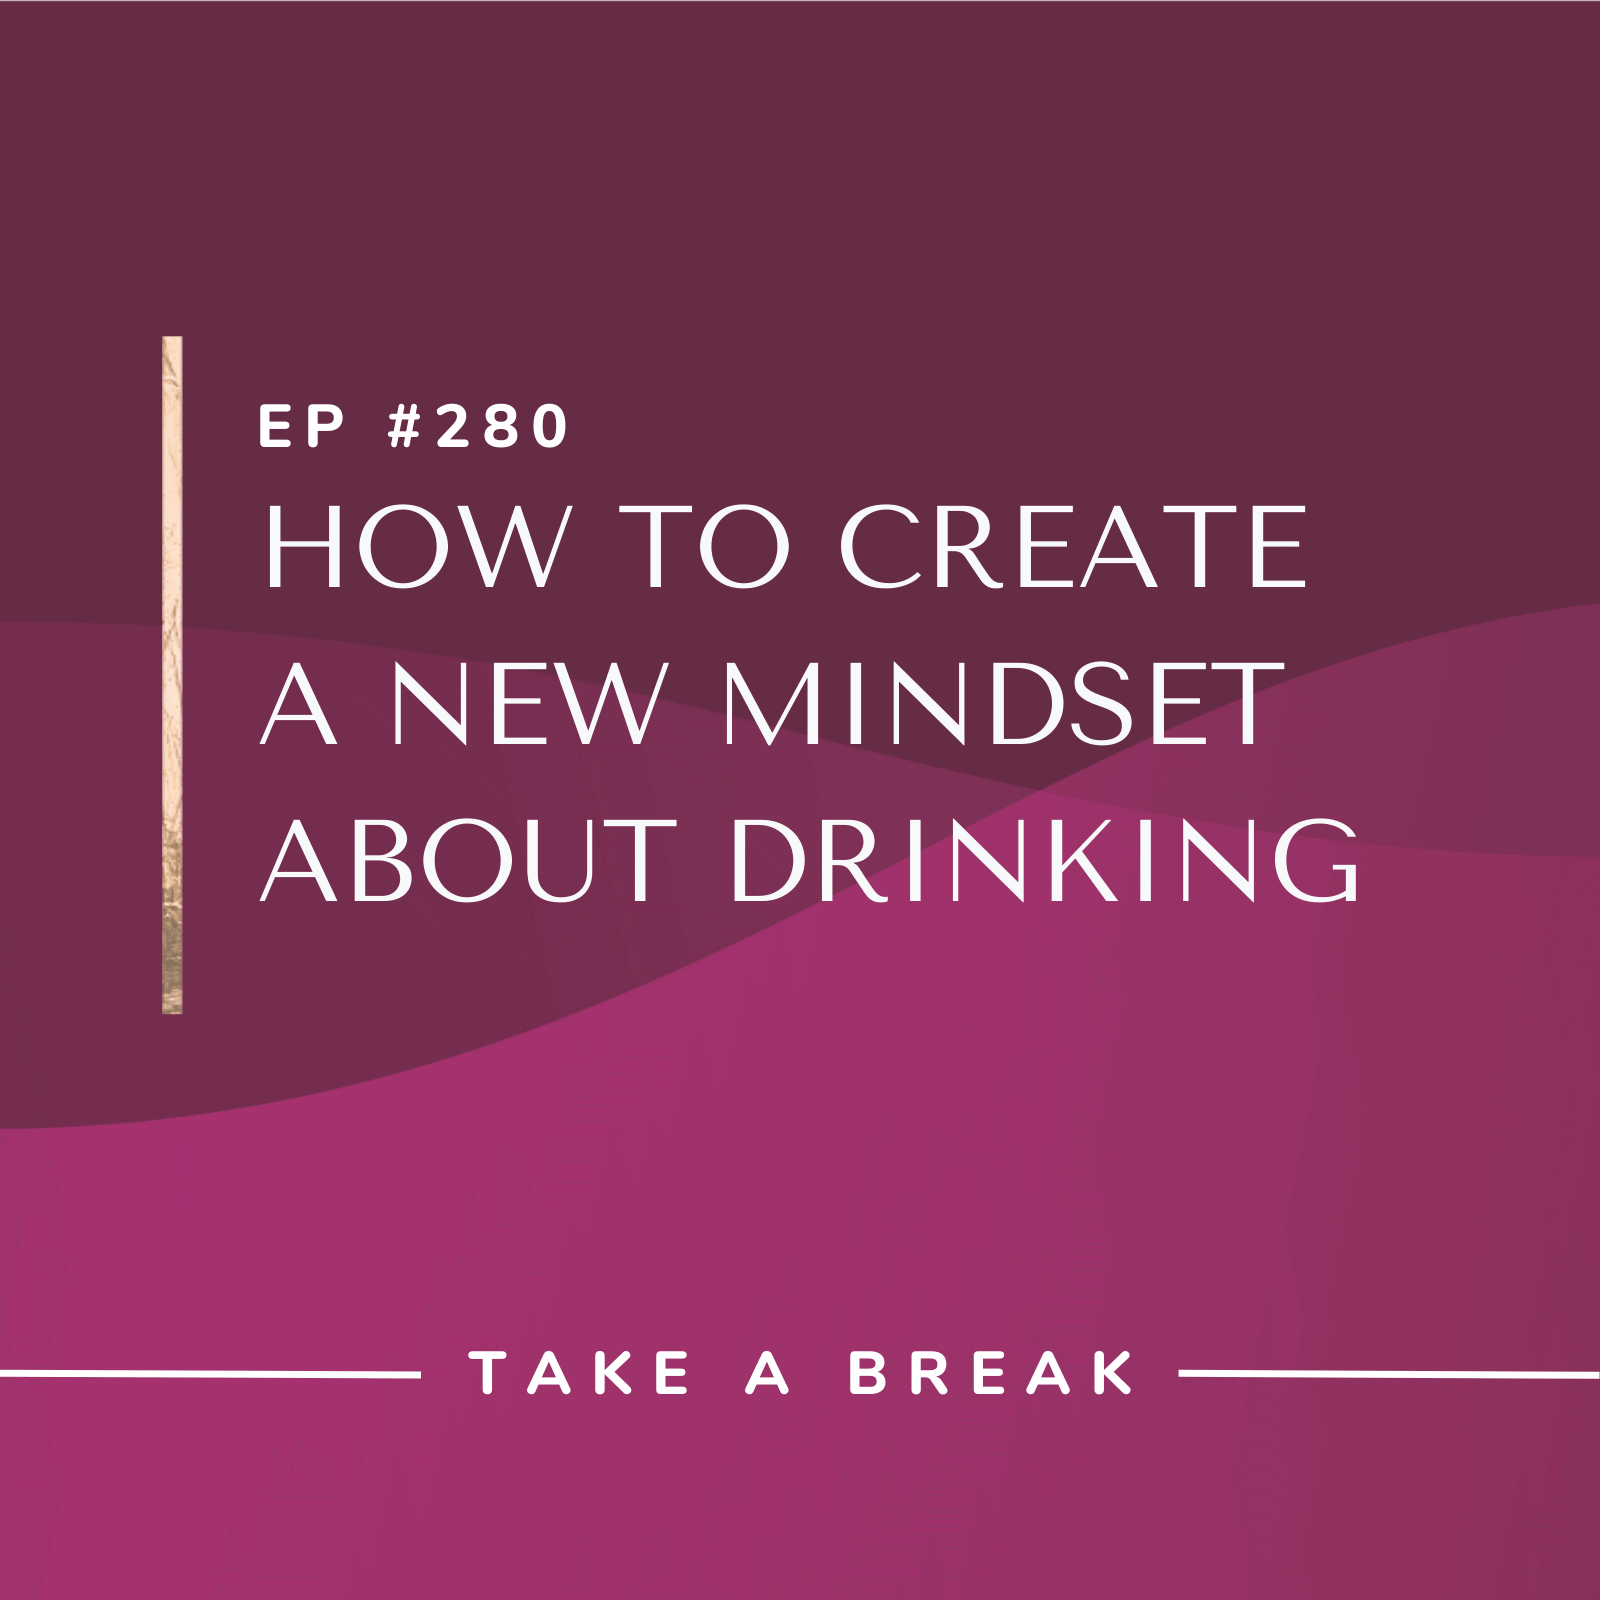 Take A Break from Drinking How to Create a New Mindset About Drinking